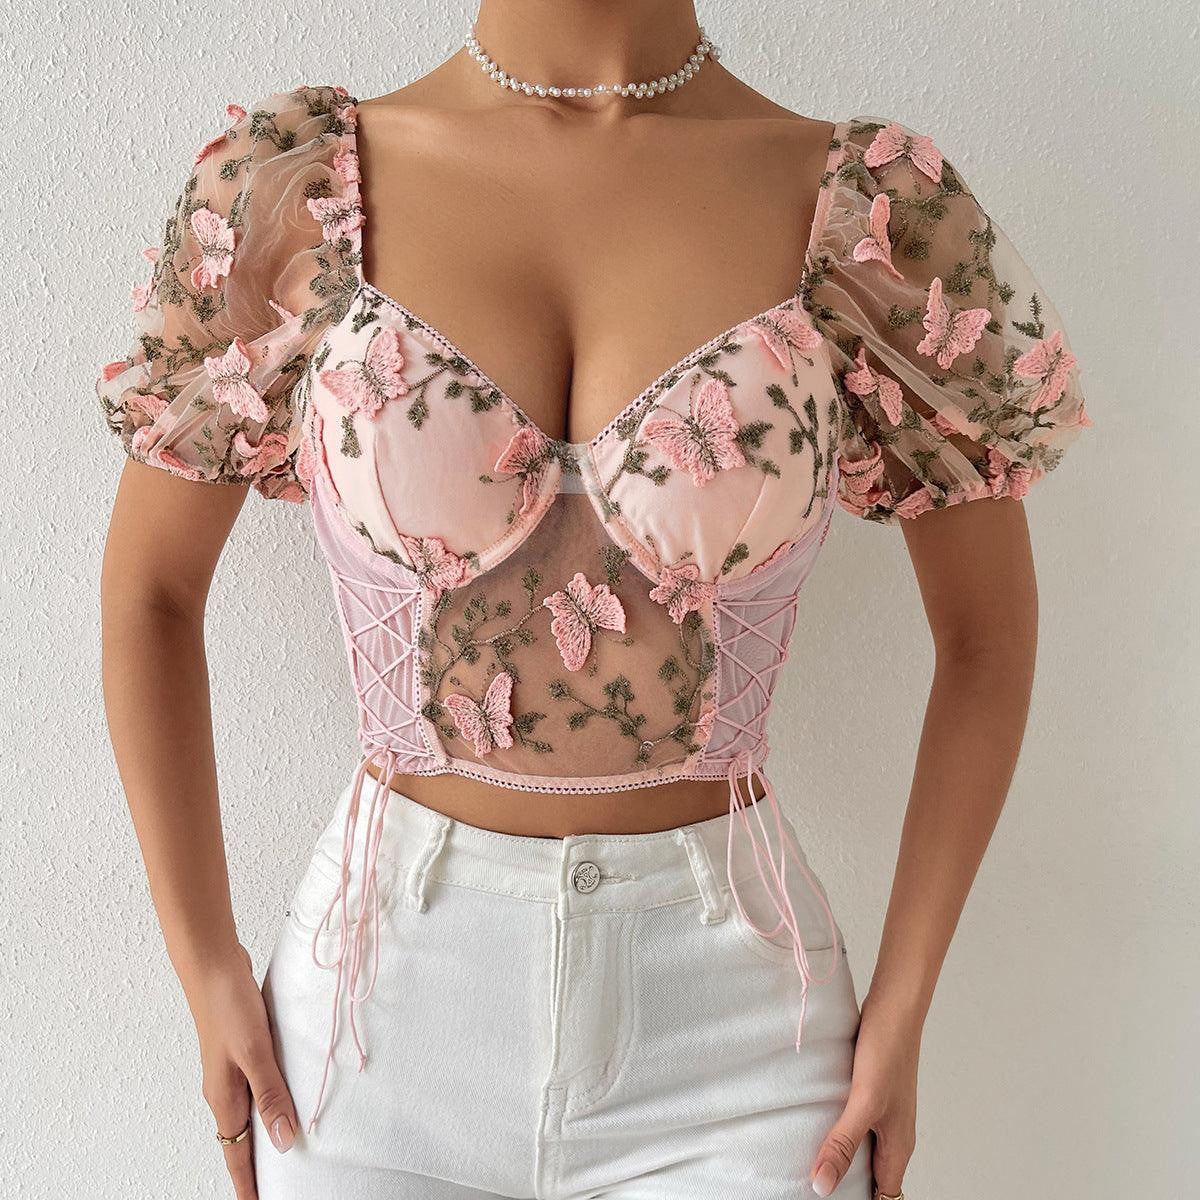 Hot Fashionista Bailey Butterfly See Through Drawstring Corset Top